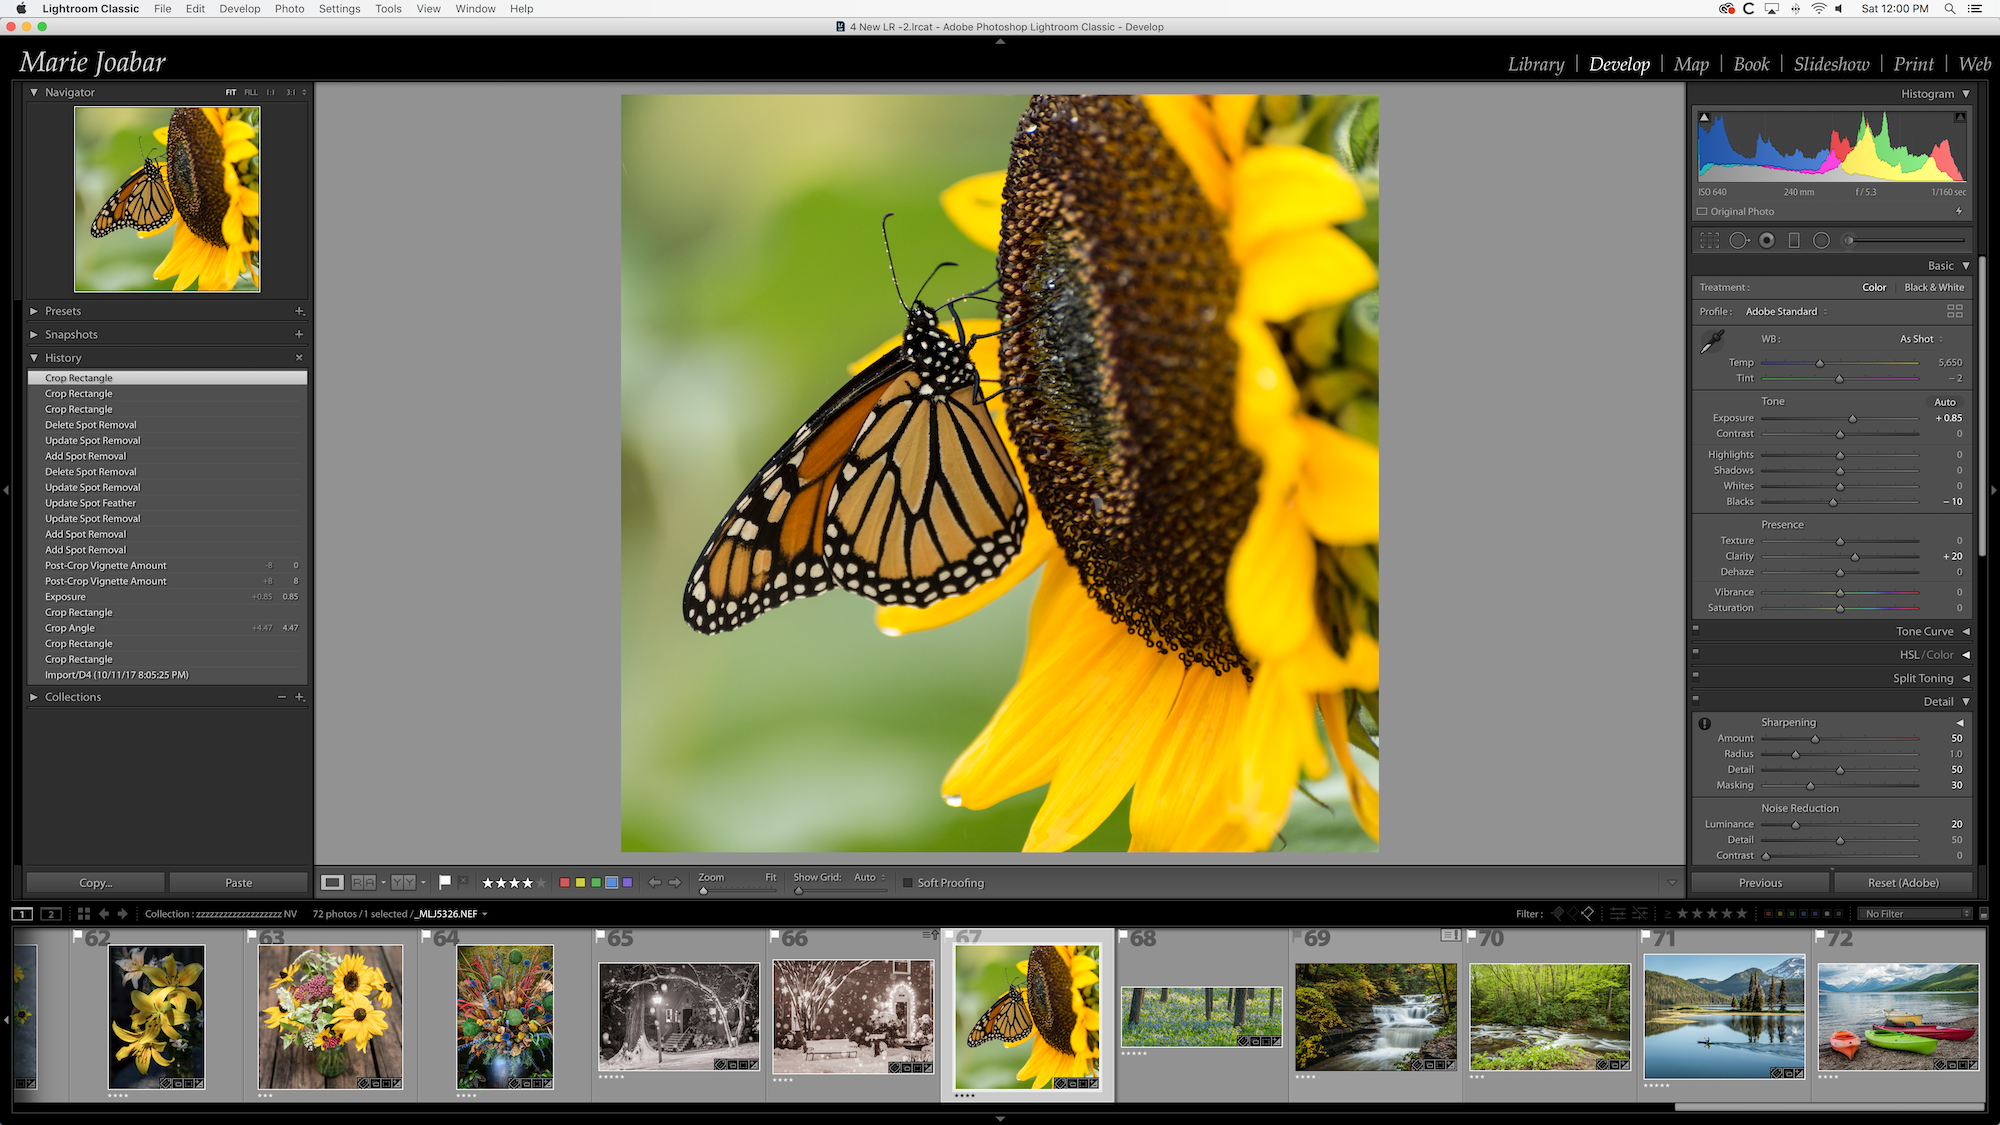 The Lightroom Classic Develop Module - Powerful Editing Tools